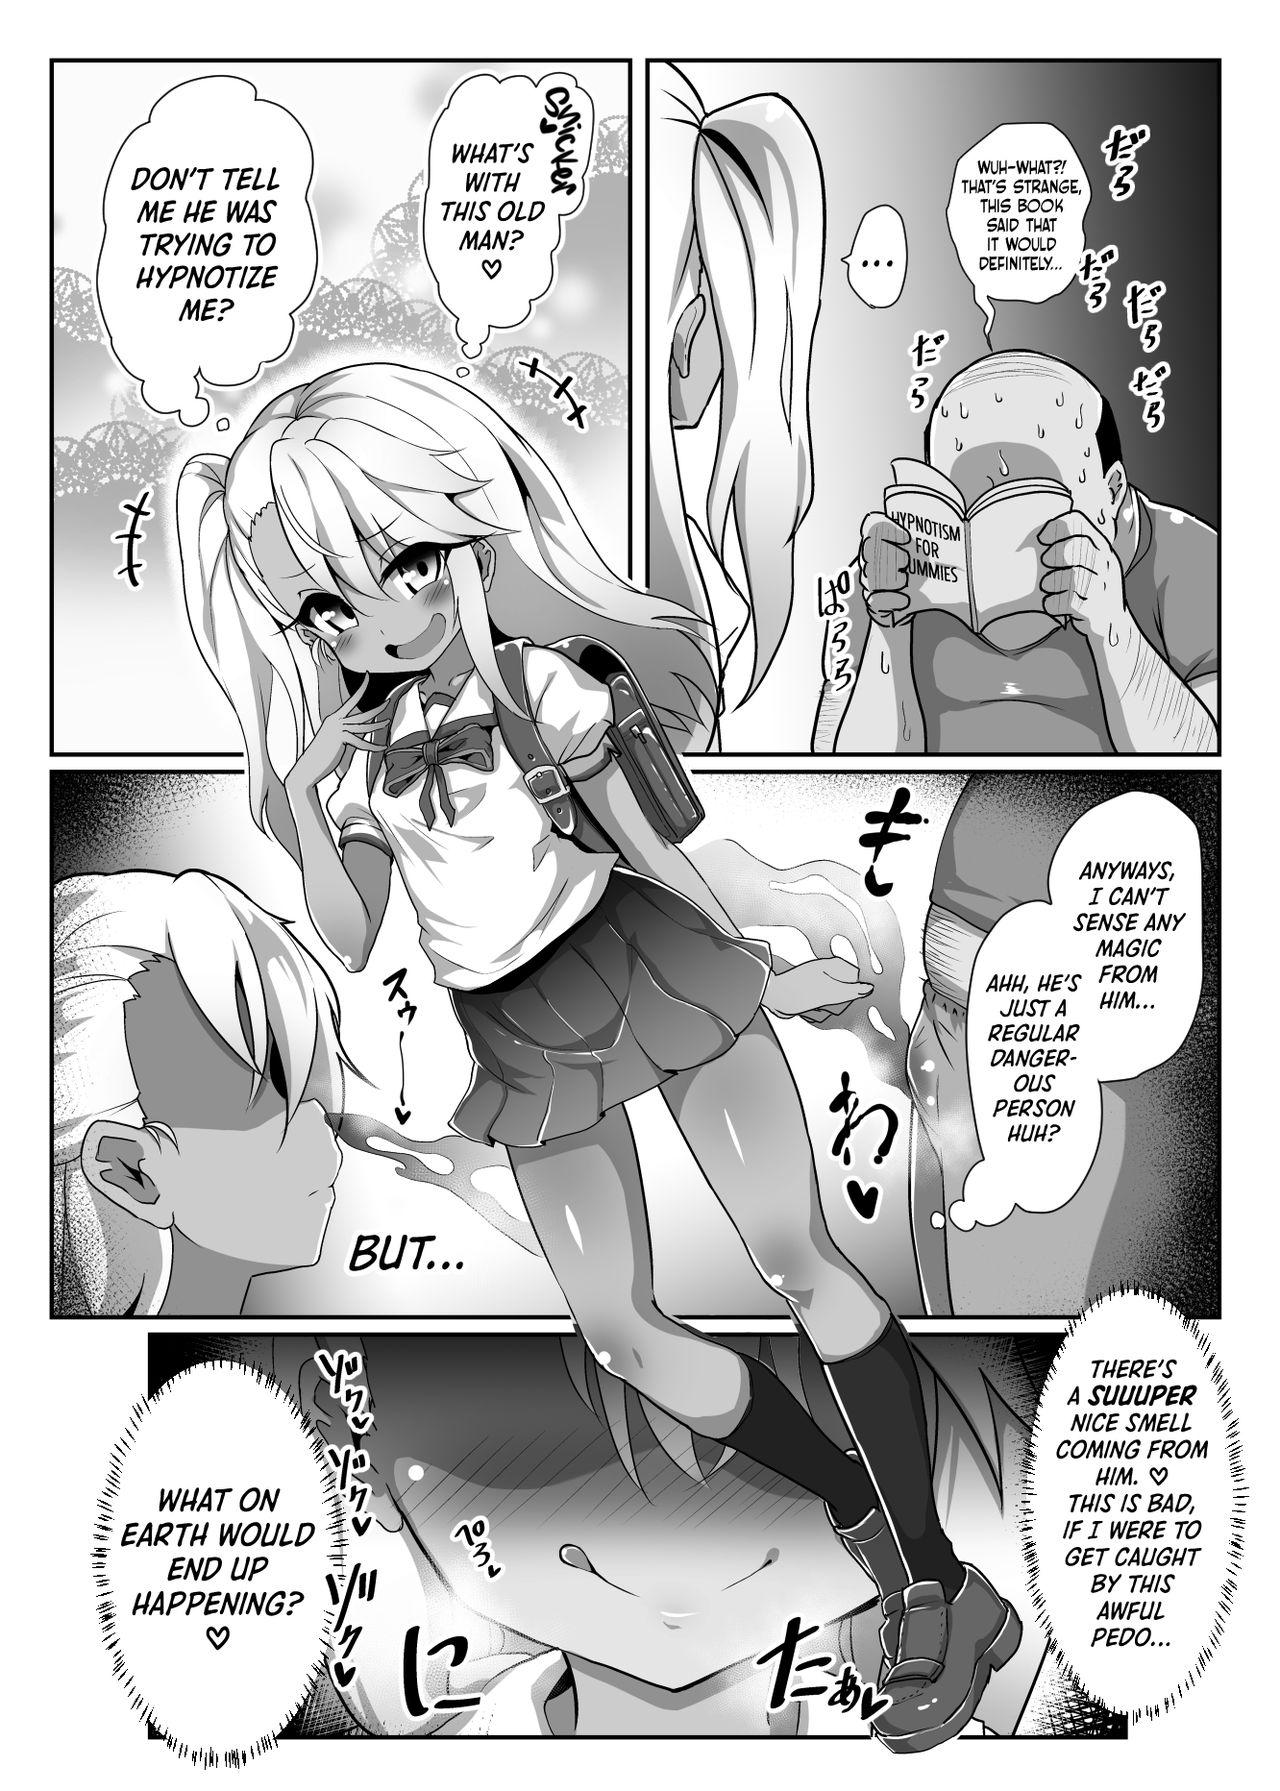 [Kotee] A book where Chloe-chan pretends to be hypnotized and relentlessly gives birth over and over to a disgusting old micro-dicked virgin’s babies. (Fate/kaleid liner Prisma Illya) [English] [Secluded] [Digital] 2